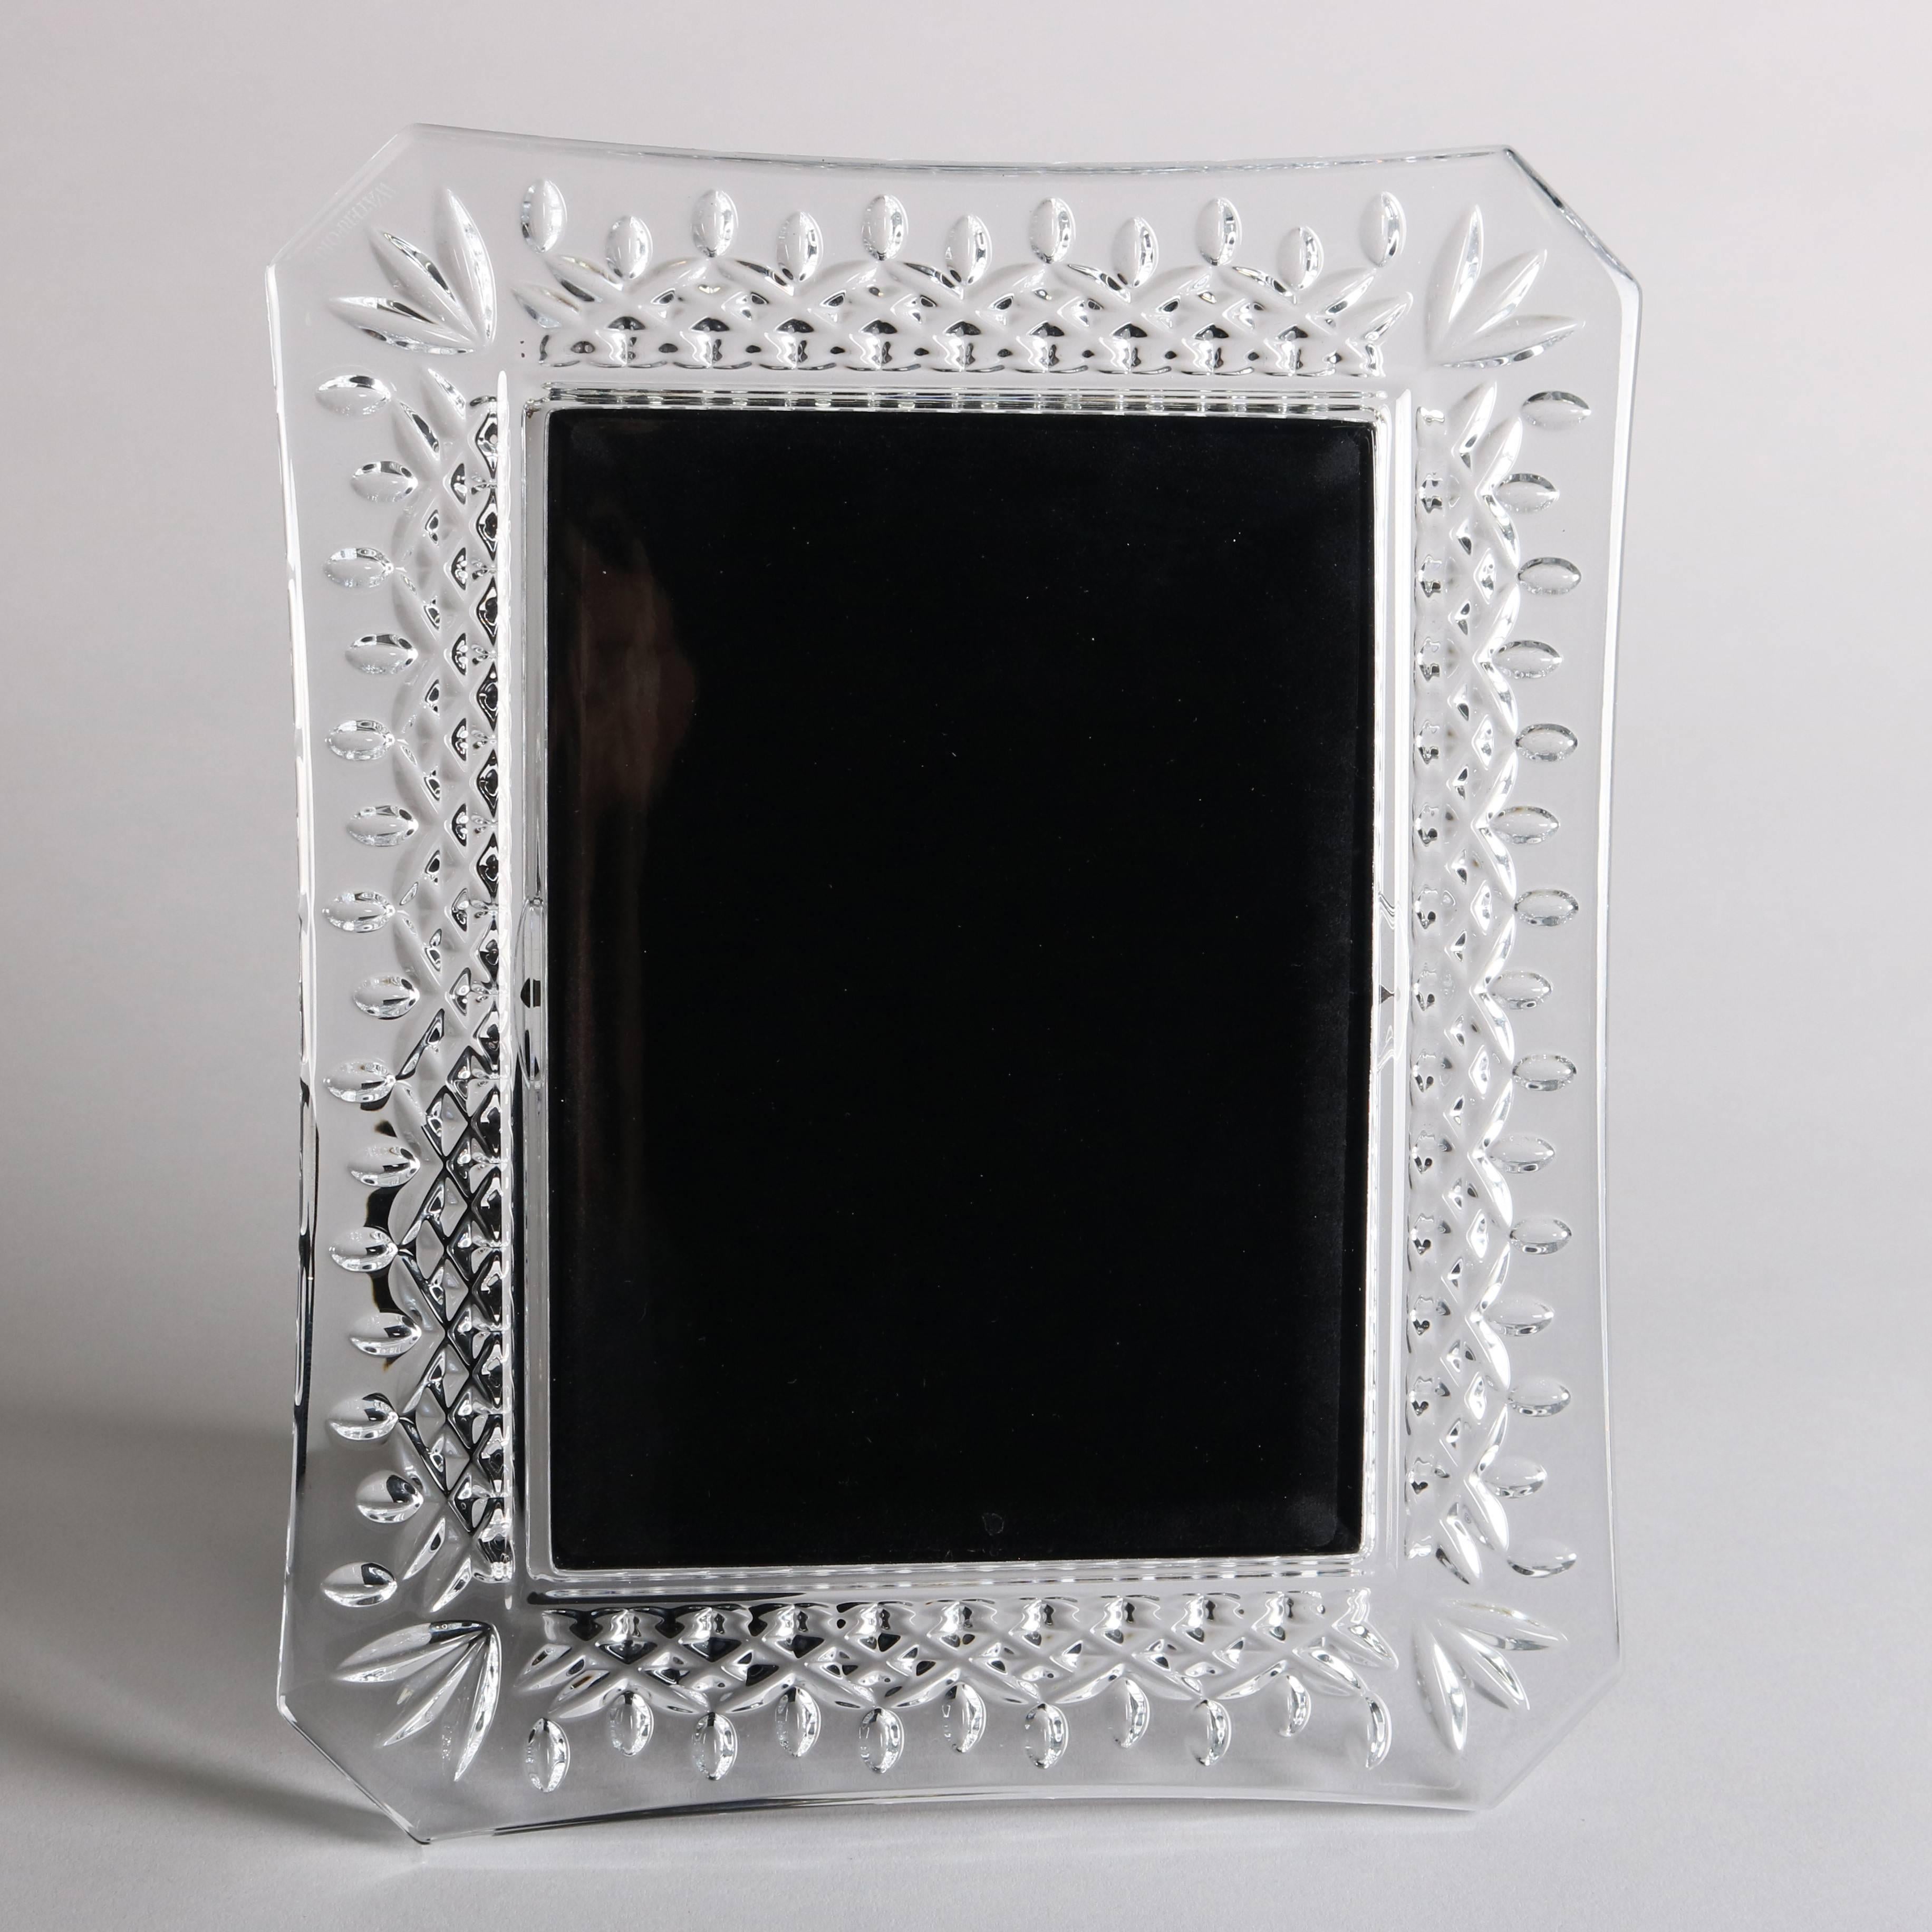 Irish Waterford cut lead crystal picture frame features hashed pattern bordering, velvet stand, signed on back.

***DELIVERY NOTICE – Due to COVID-19 we are employing NO-CONTACT PRACTICES in the transfer of purchased items.  Additionally, for those